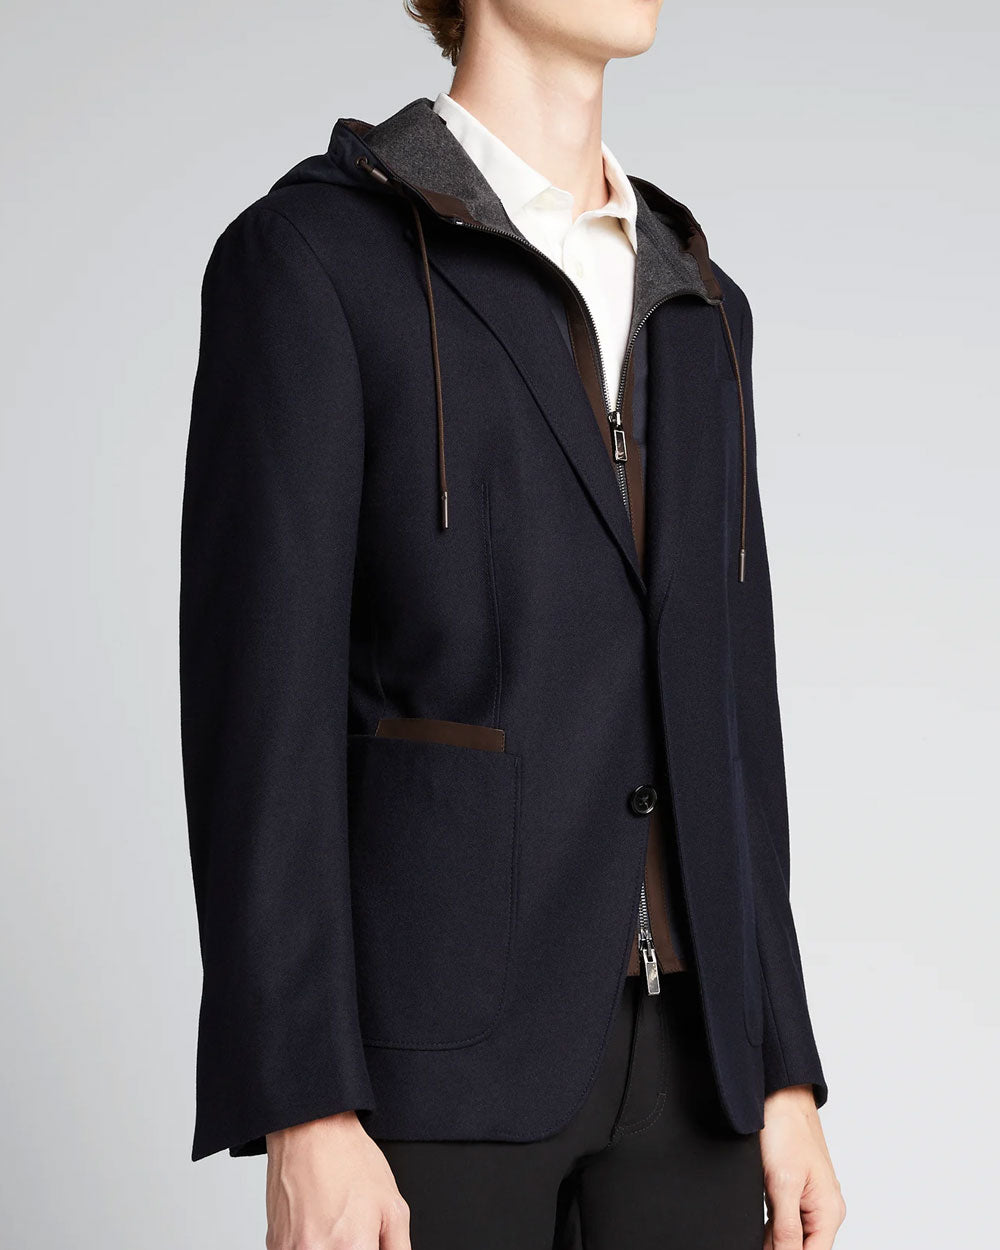 Navy Cashmere Sportcoat with Detachable Hooded Bib